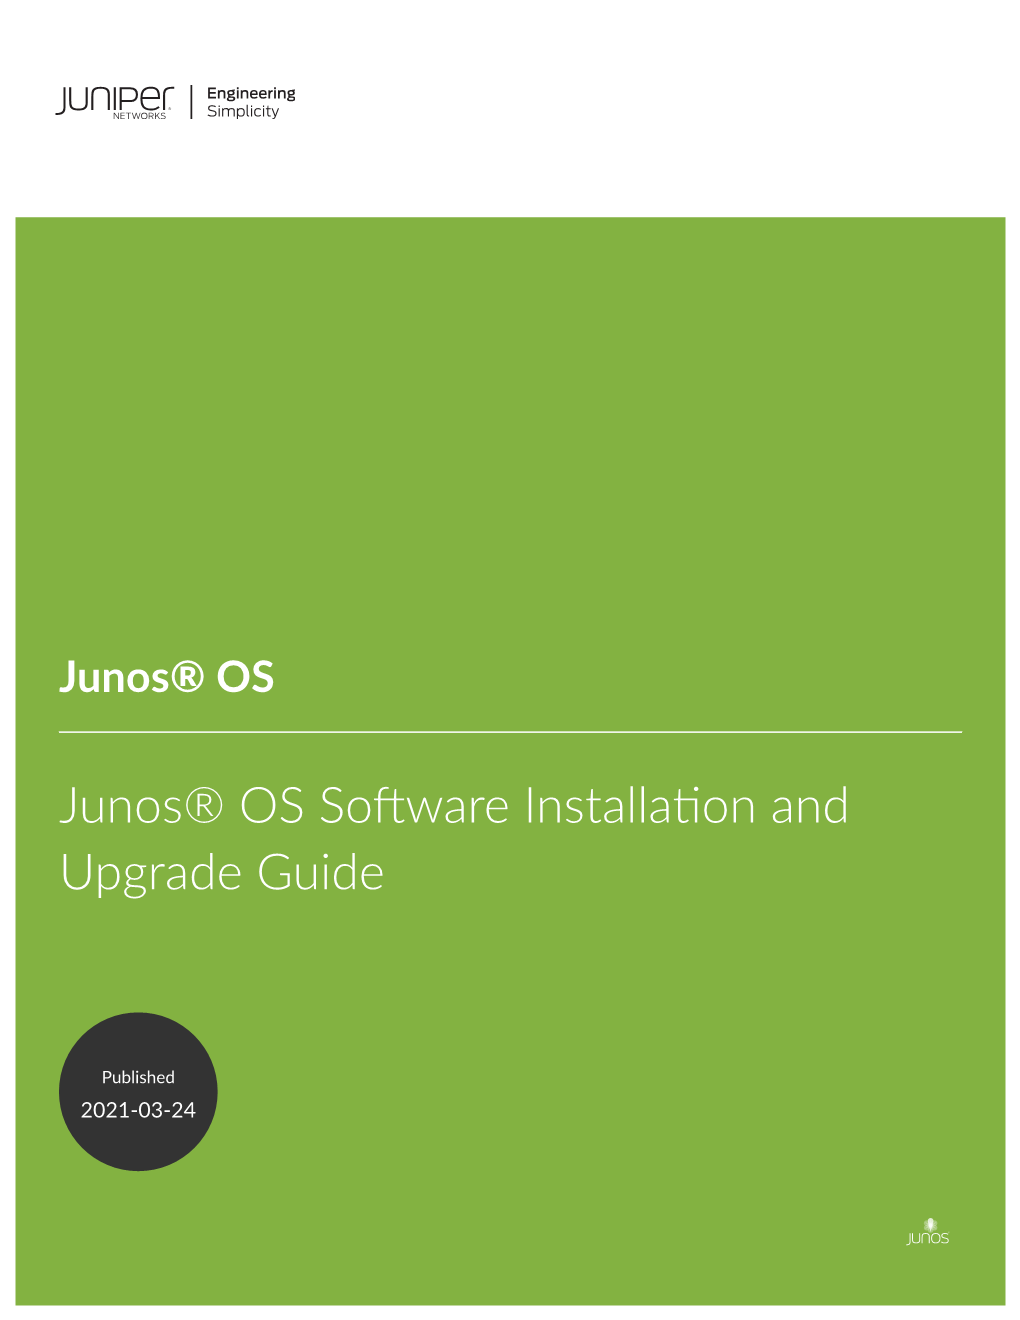 Junos® OS Software Installation and Upgrade Guide